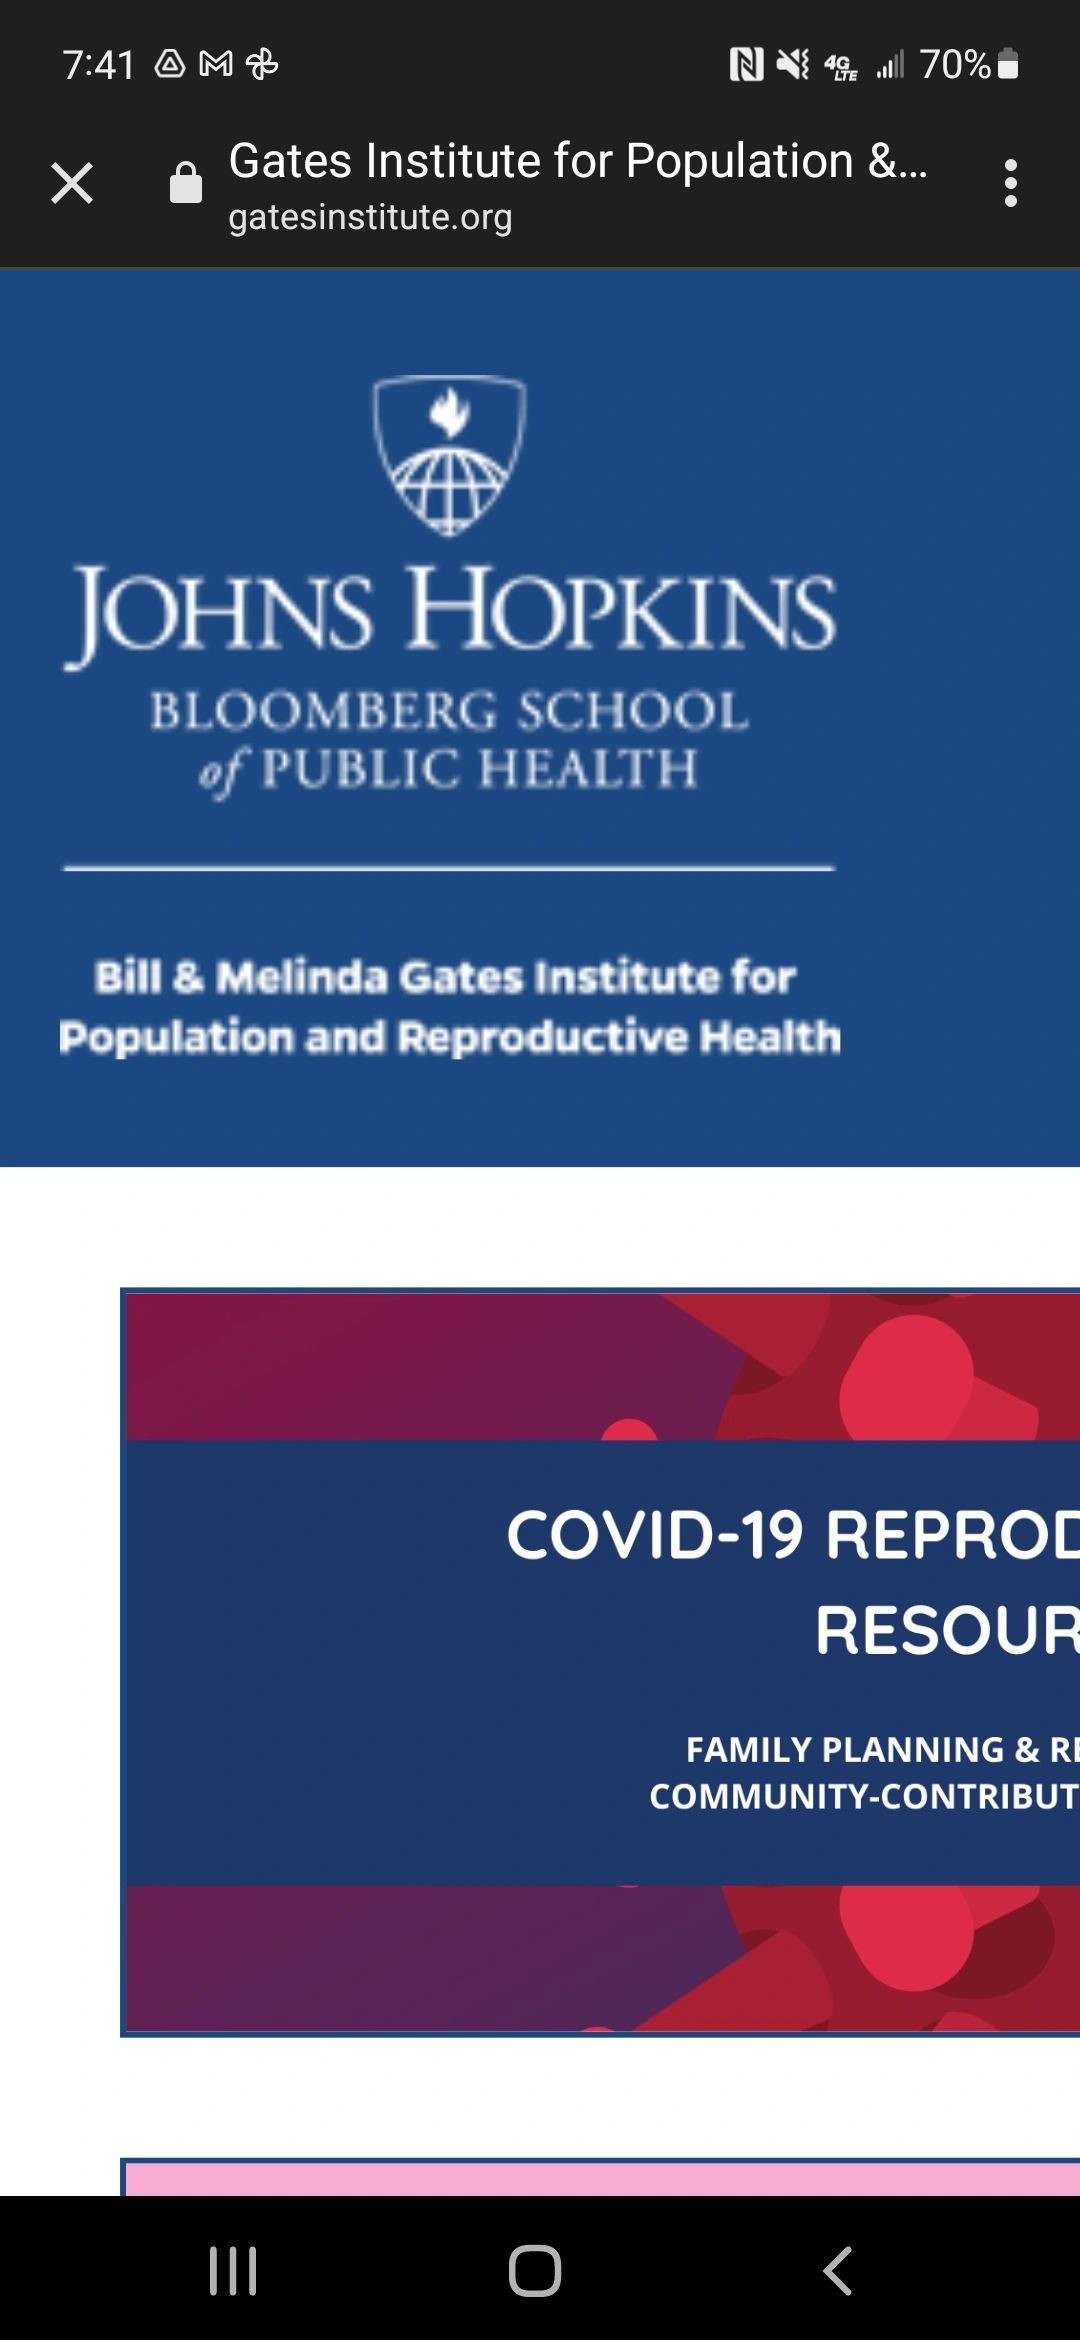 Bill & Melinda Gates Institute for population and reproductive health